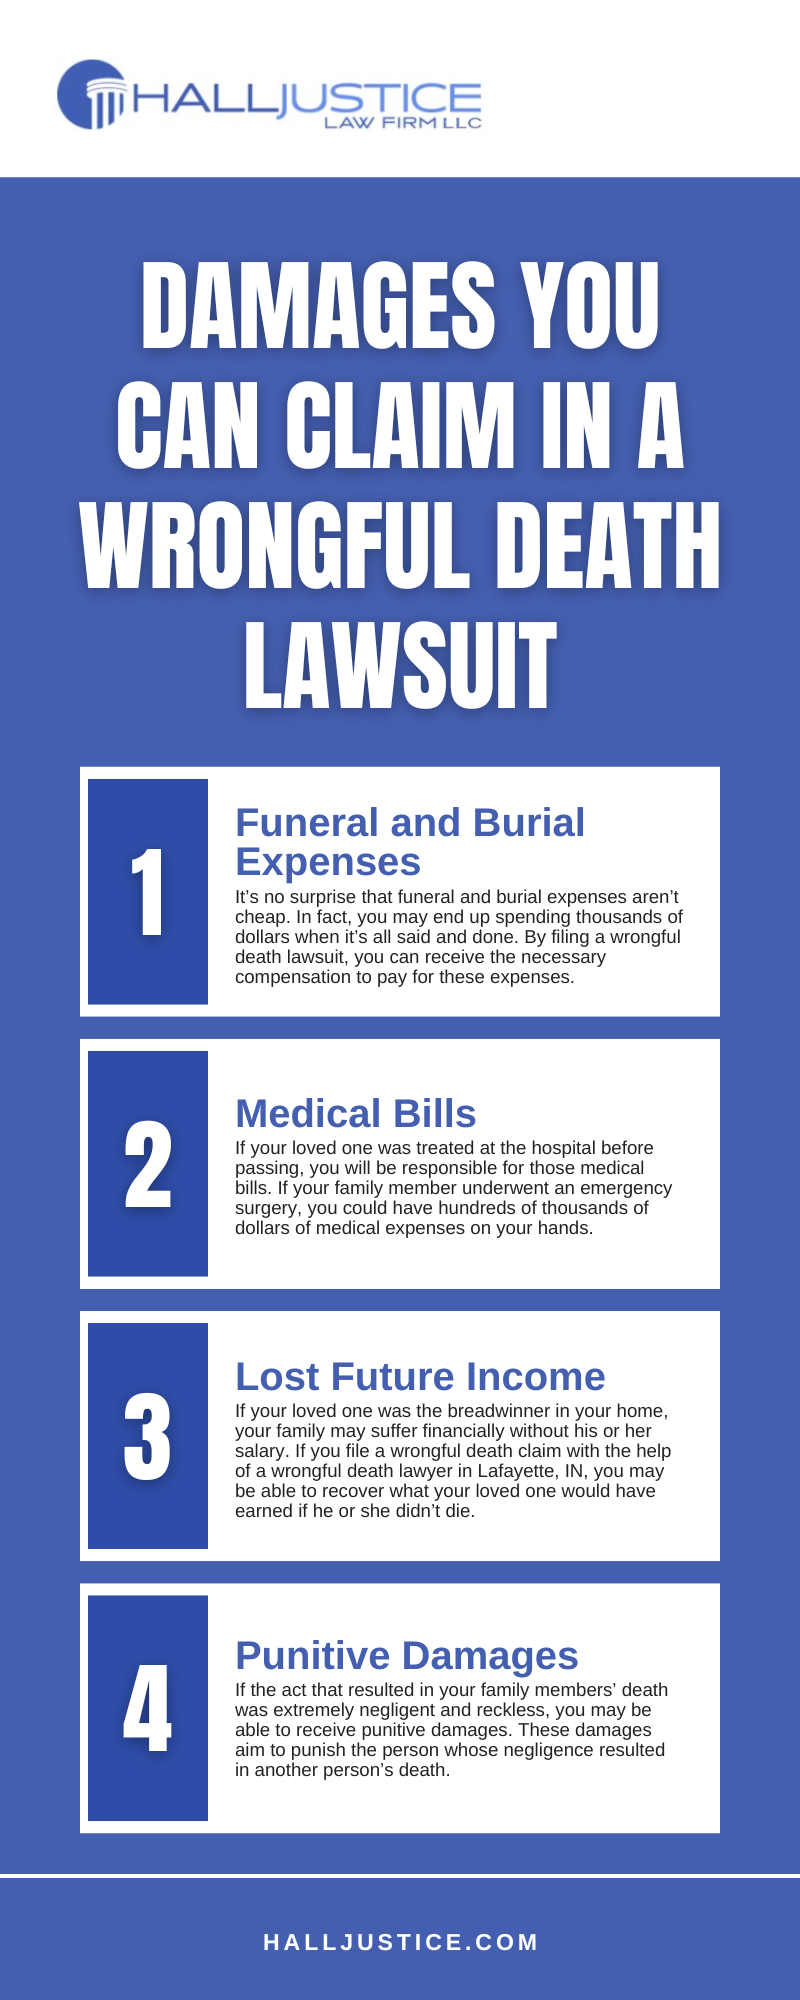 Damages You Can Claim In A Wrongful Death Lawsuit Infographic